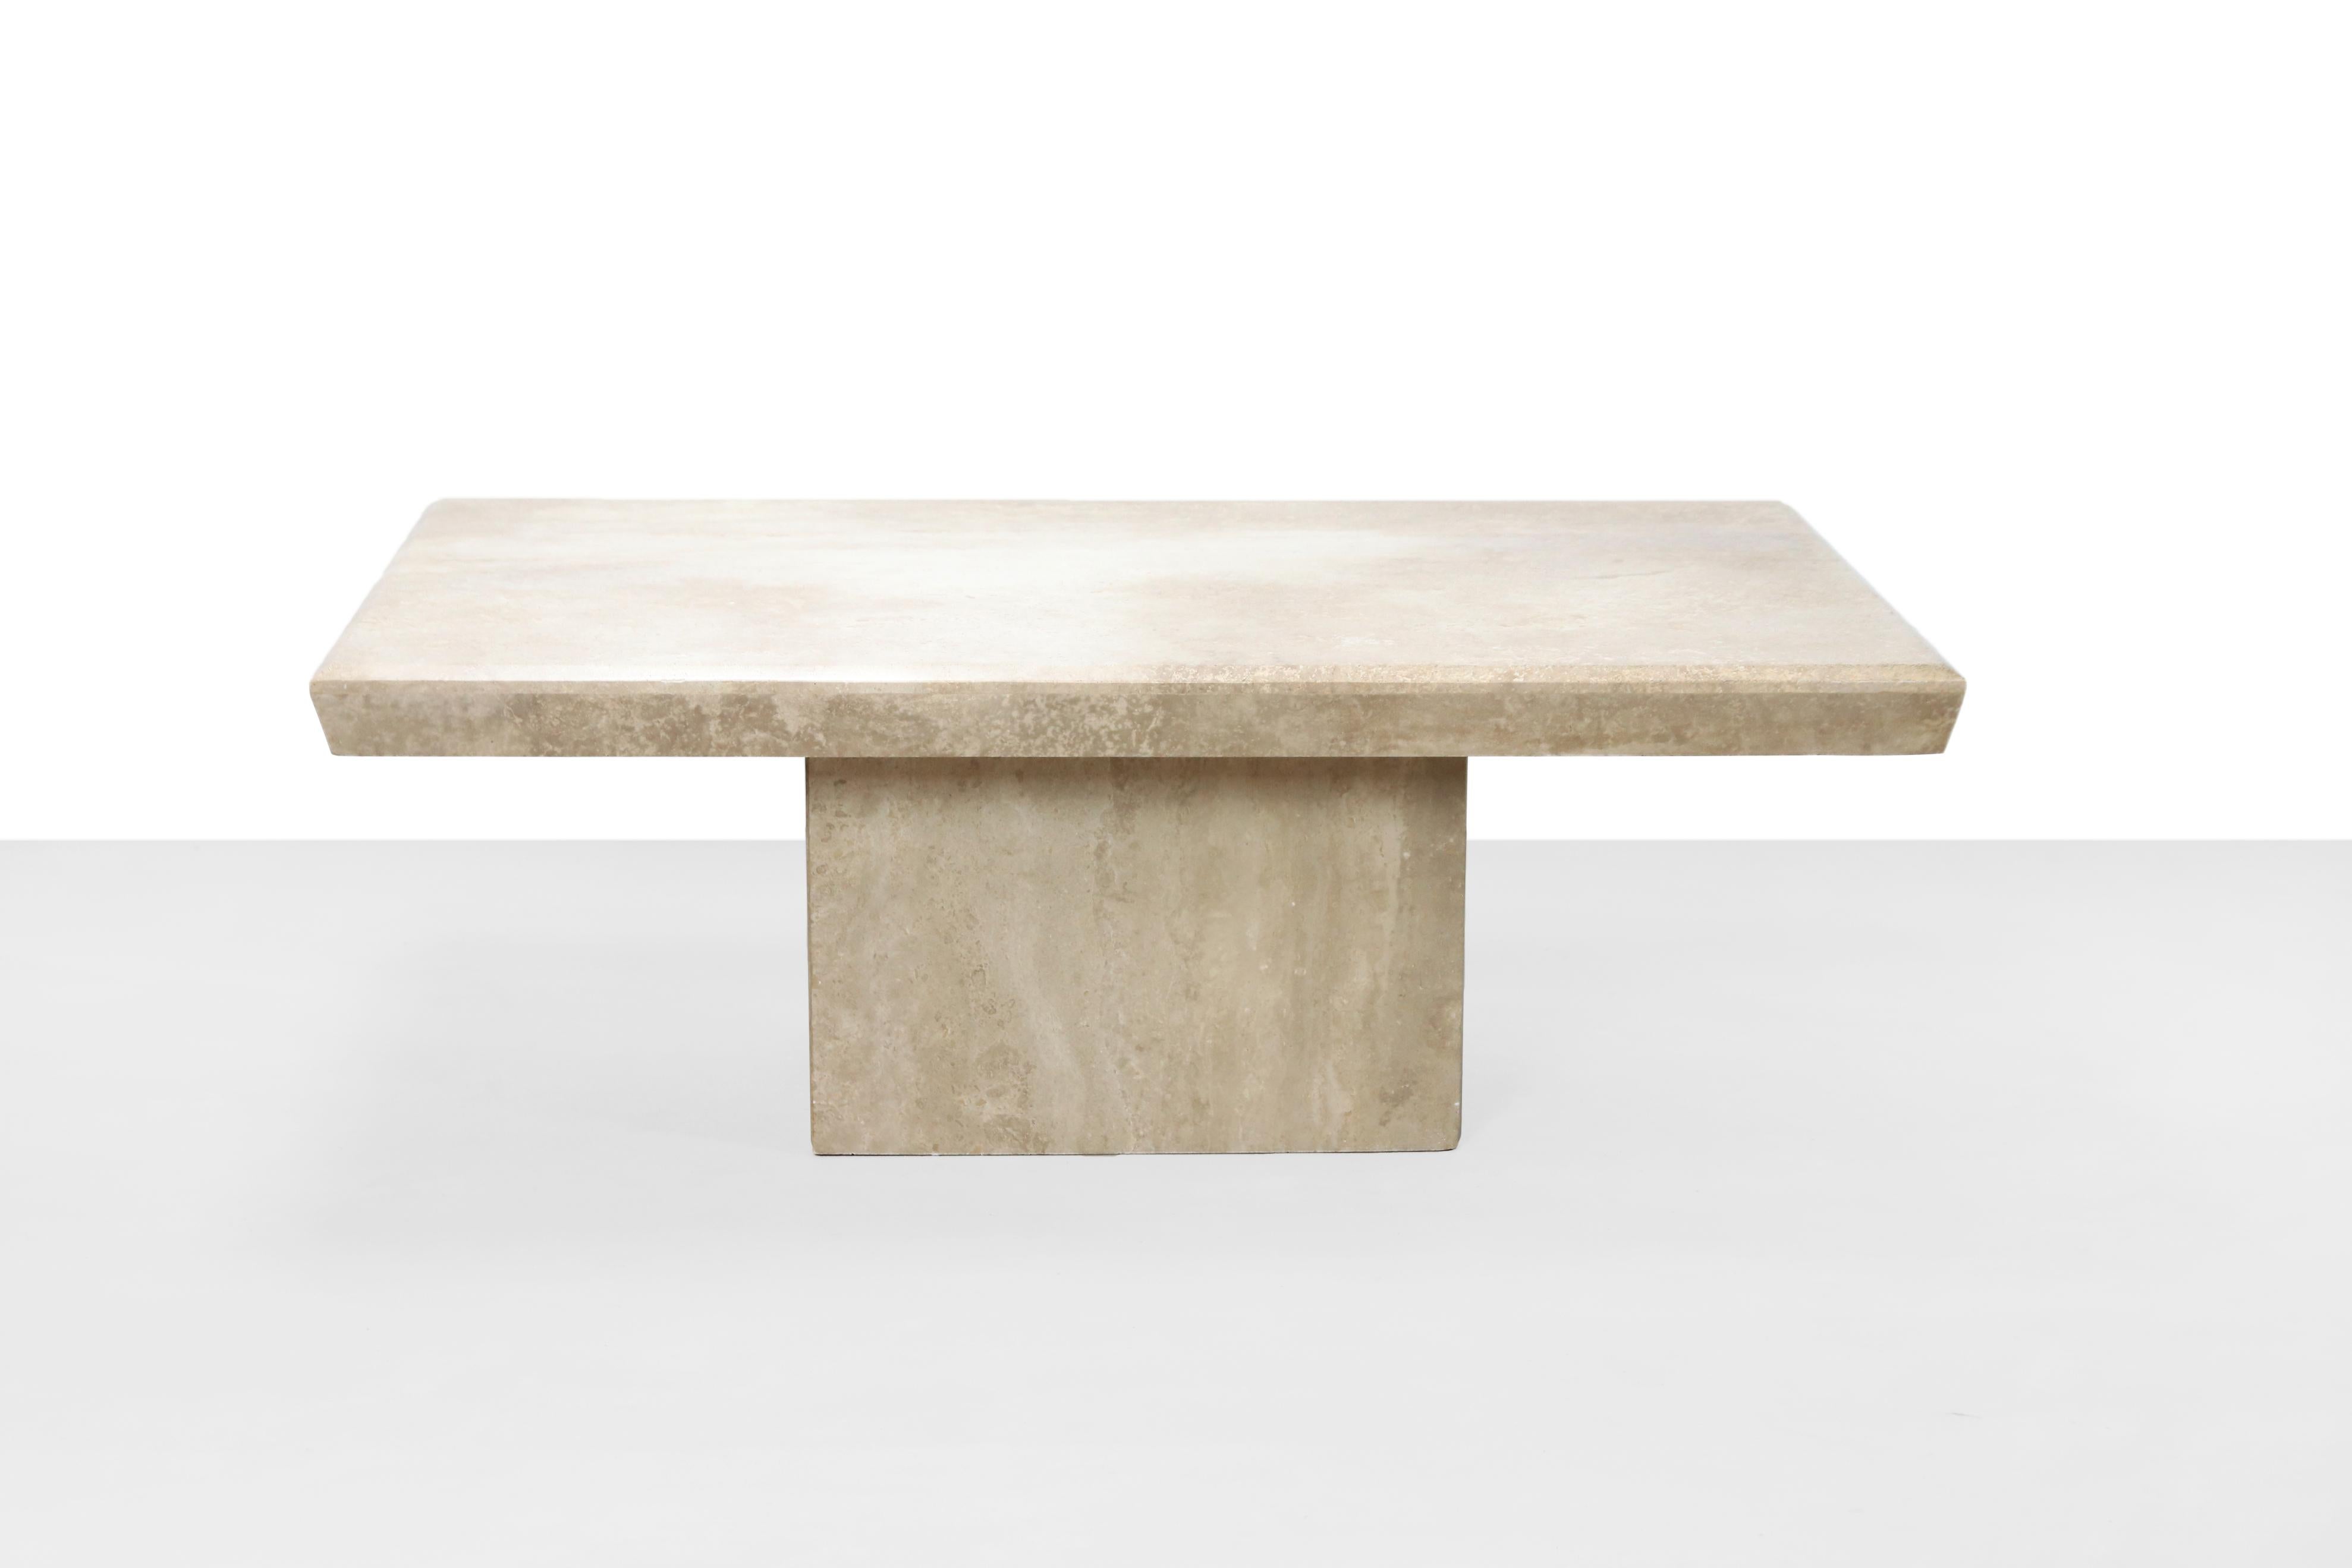 Rectangular coffee table from Italian Travertine.
Beautiful solid table with a very nice and sophisticated look and feel, because the travertine has a rich, active grain.
This piece is most likely from the 1970s.